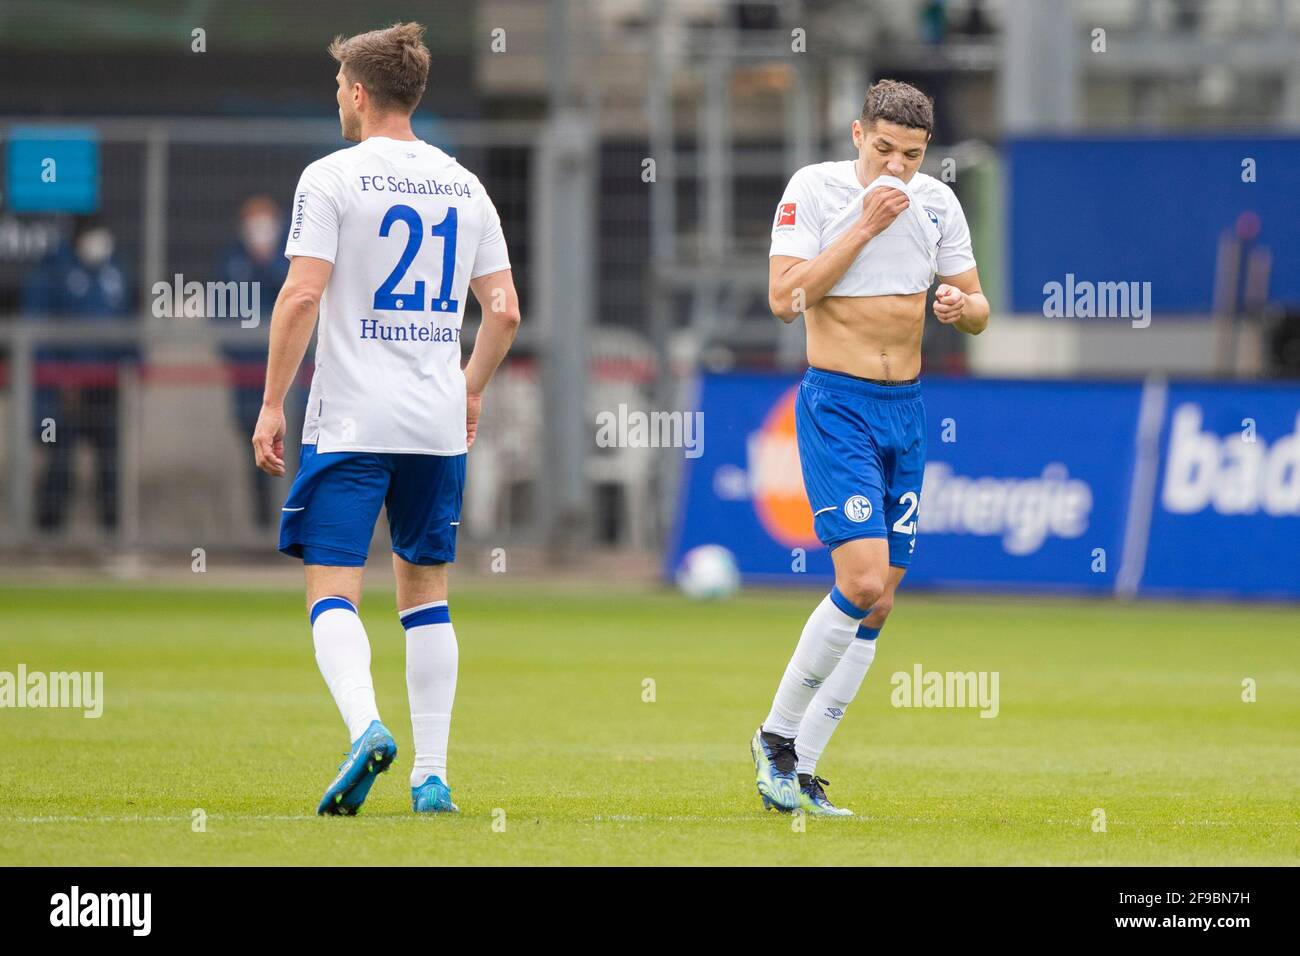 Freiburg Im Breisgau, Germany. 17th Apr, 2021. Football: Bundesliga, SC Freiburg - FC Schalke 04, Matchday 29 at Schwarzwald-Stadion. Schalke's Klaas-Jan Huntelaar (l) and Schalke's Amine Harit (r) react during the match. Credit: Tom Weller/dpa - IMPORTANT NOTE: In accordance with the regulations of the DFL Deutsche Fußball Liga and/or the DFB Deutscher Fußball-Bund, it is prohibited to use or have used photographs taken in the stadium and/or of the match in the form of sequence pictures and/or video-like photo series./dpa/Alamy Live News Stock Photo